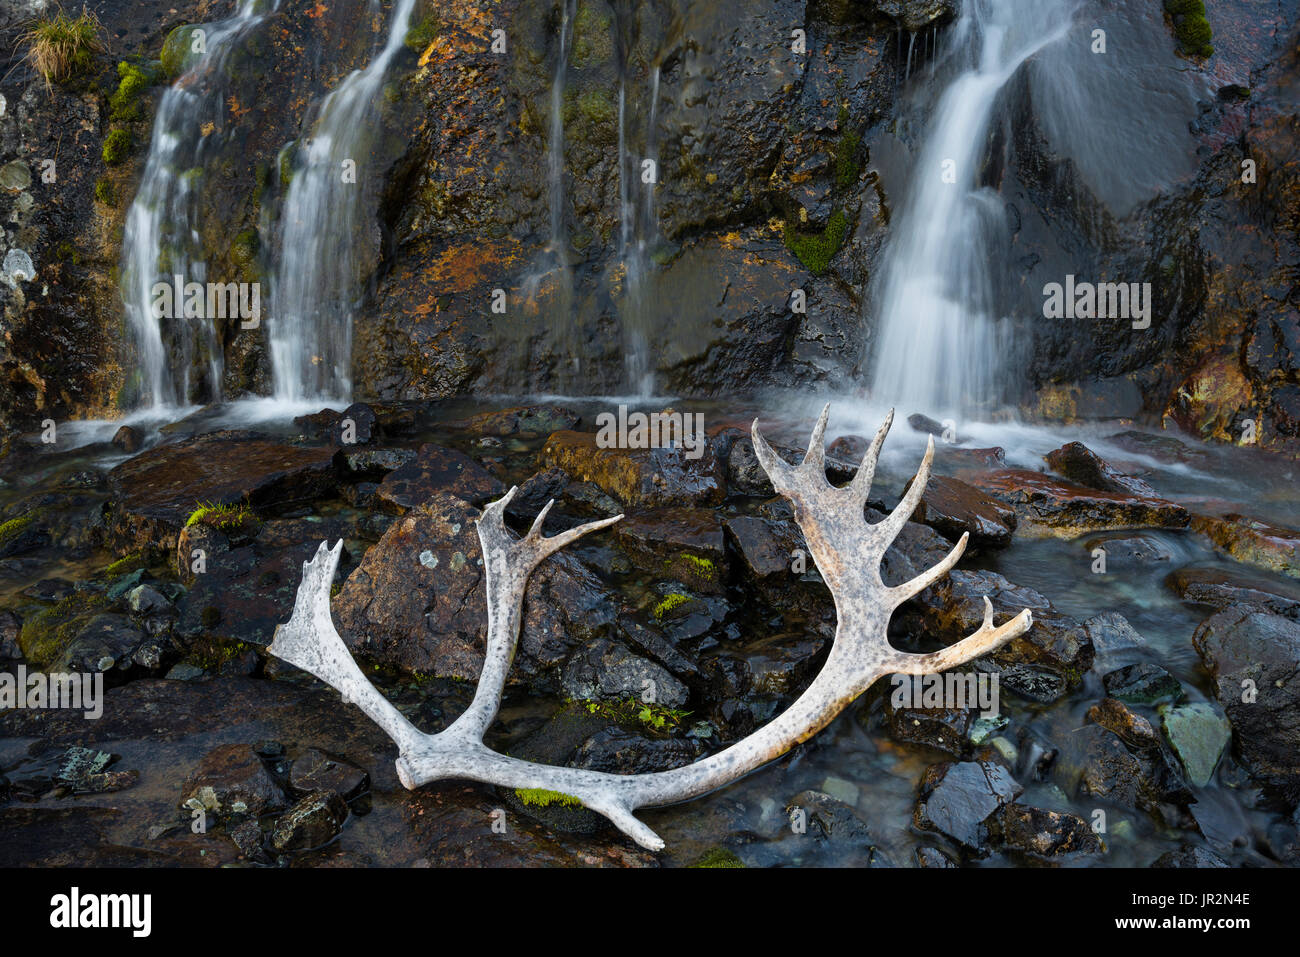 Waterfall With A Caribou Shed In The Foreground, Clearwater Mountains, Interior Alaska, USA Stock Photo